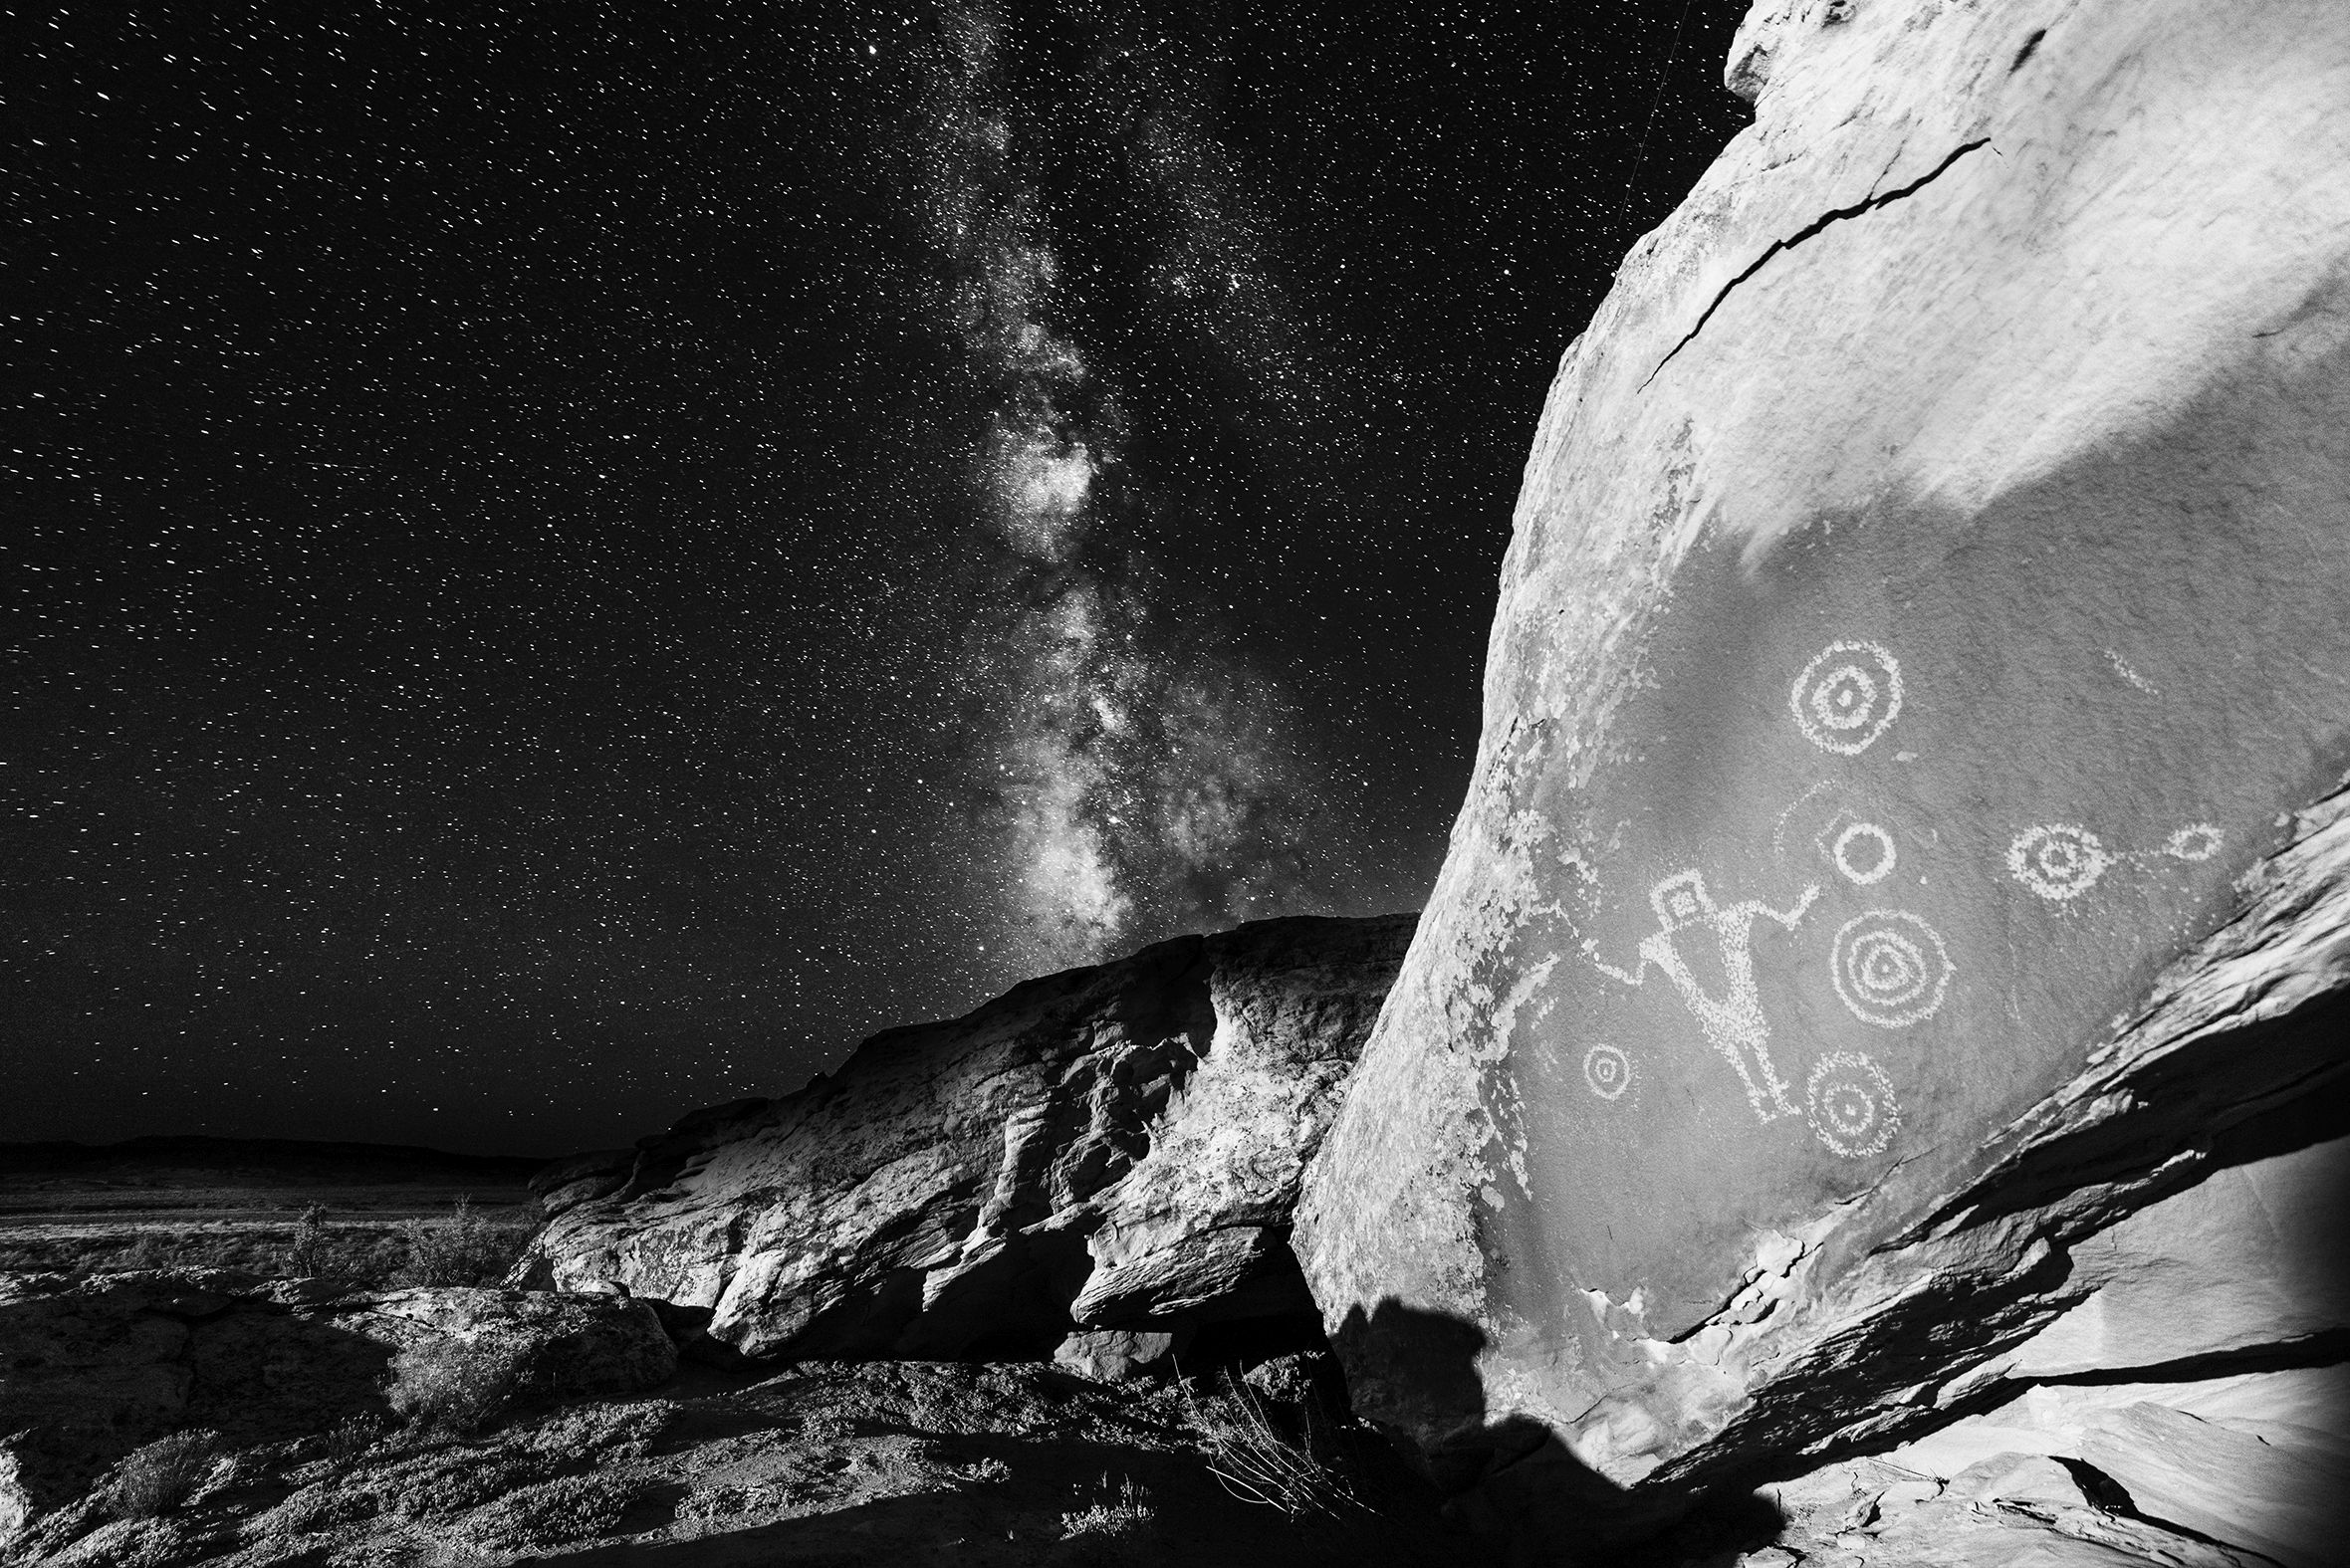 “Ancient Nights: Juggling Fire” shows Anasazi petroglyphs in the foreground against a night sky with a burst of stars. The petroglyphs are of a person with a square head standing with outstretched arms and concentric circles on both sides.